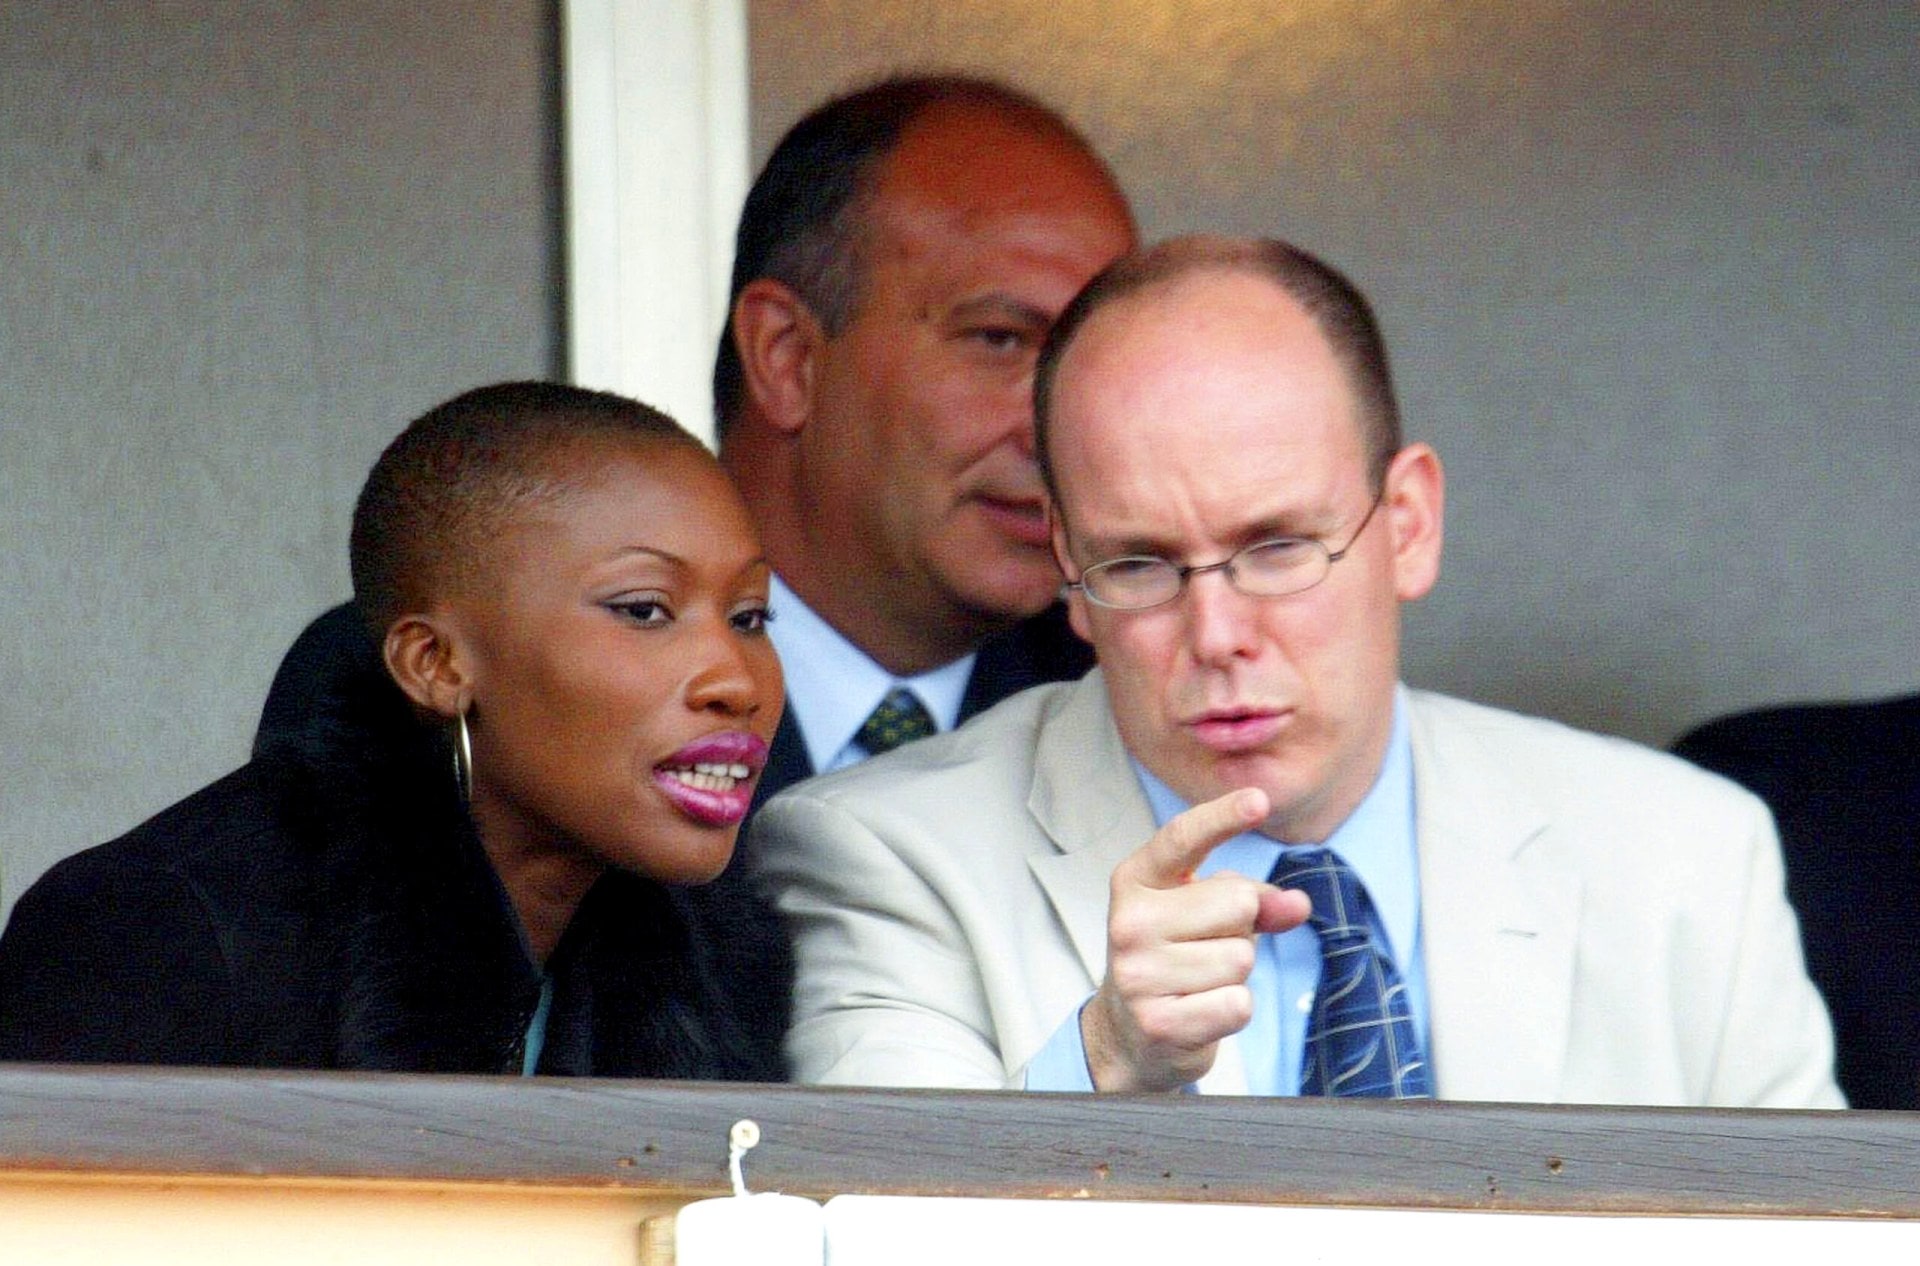 Prince Albert and Nicole Coste in 2002